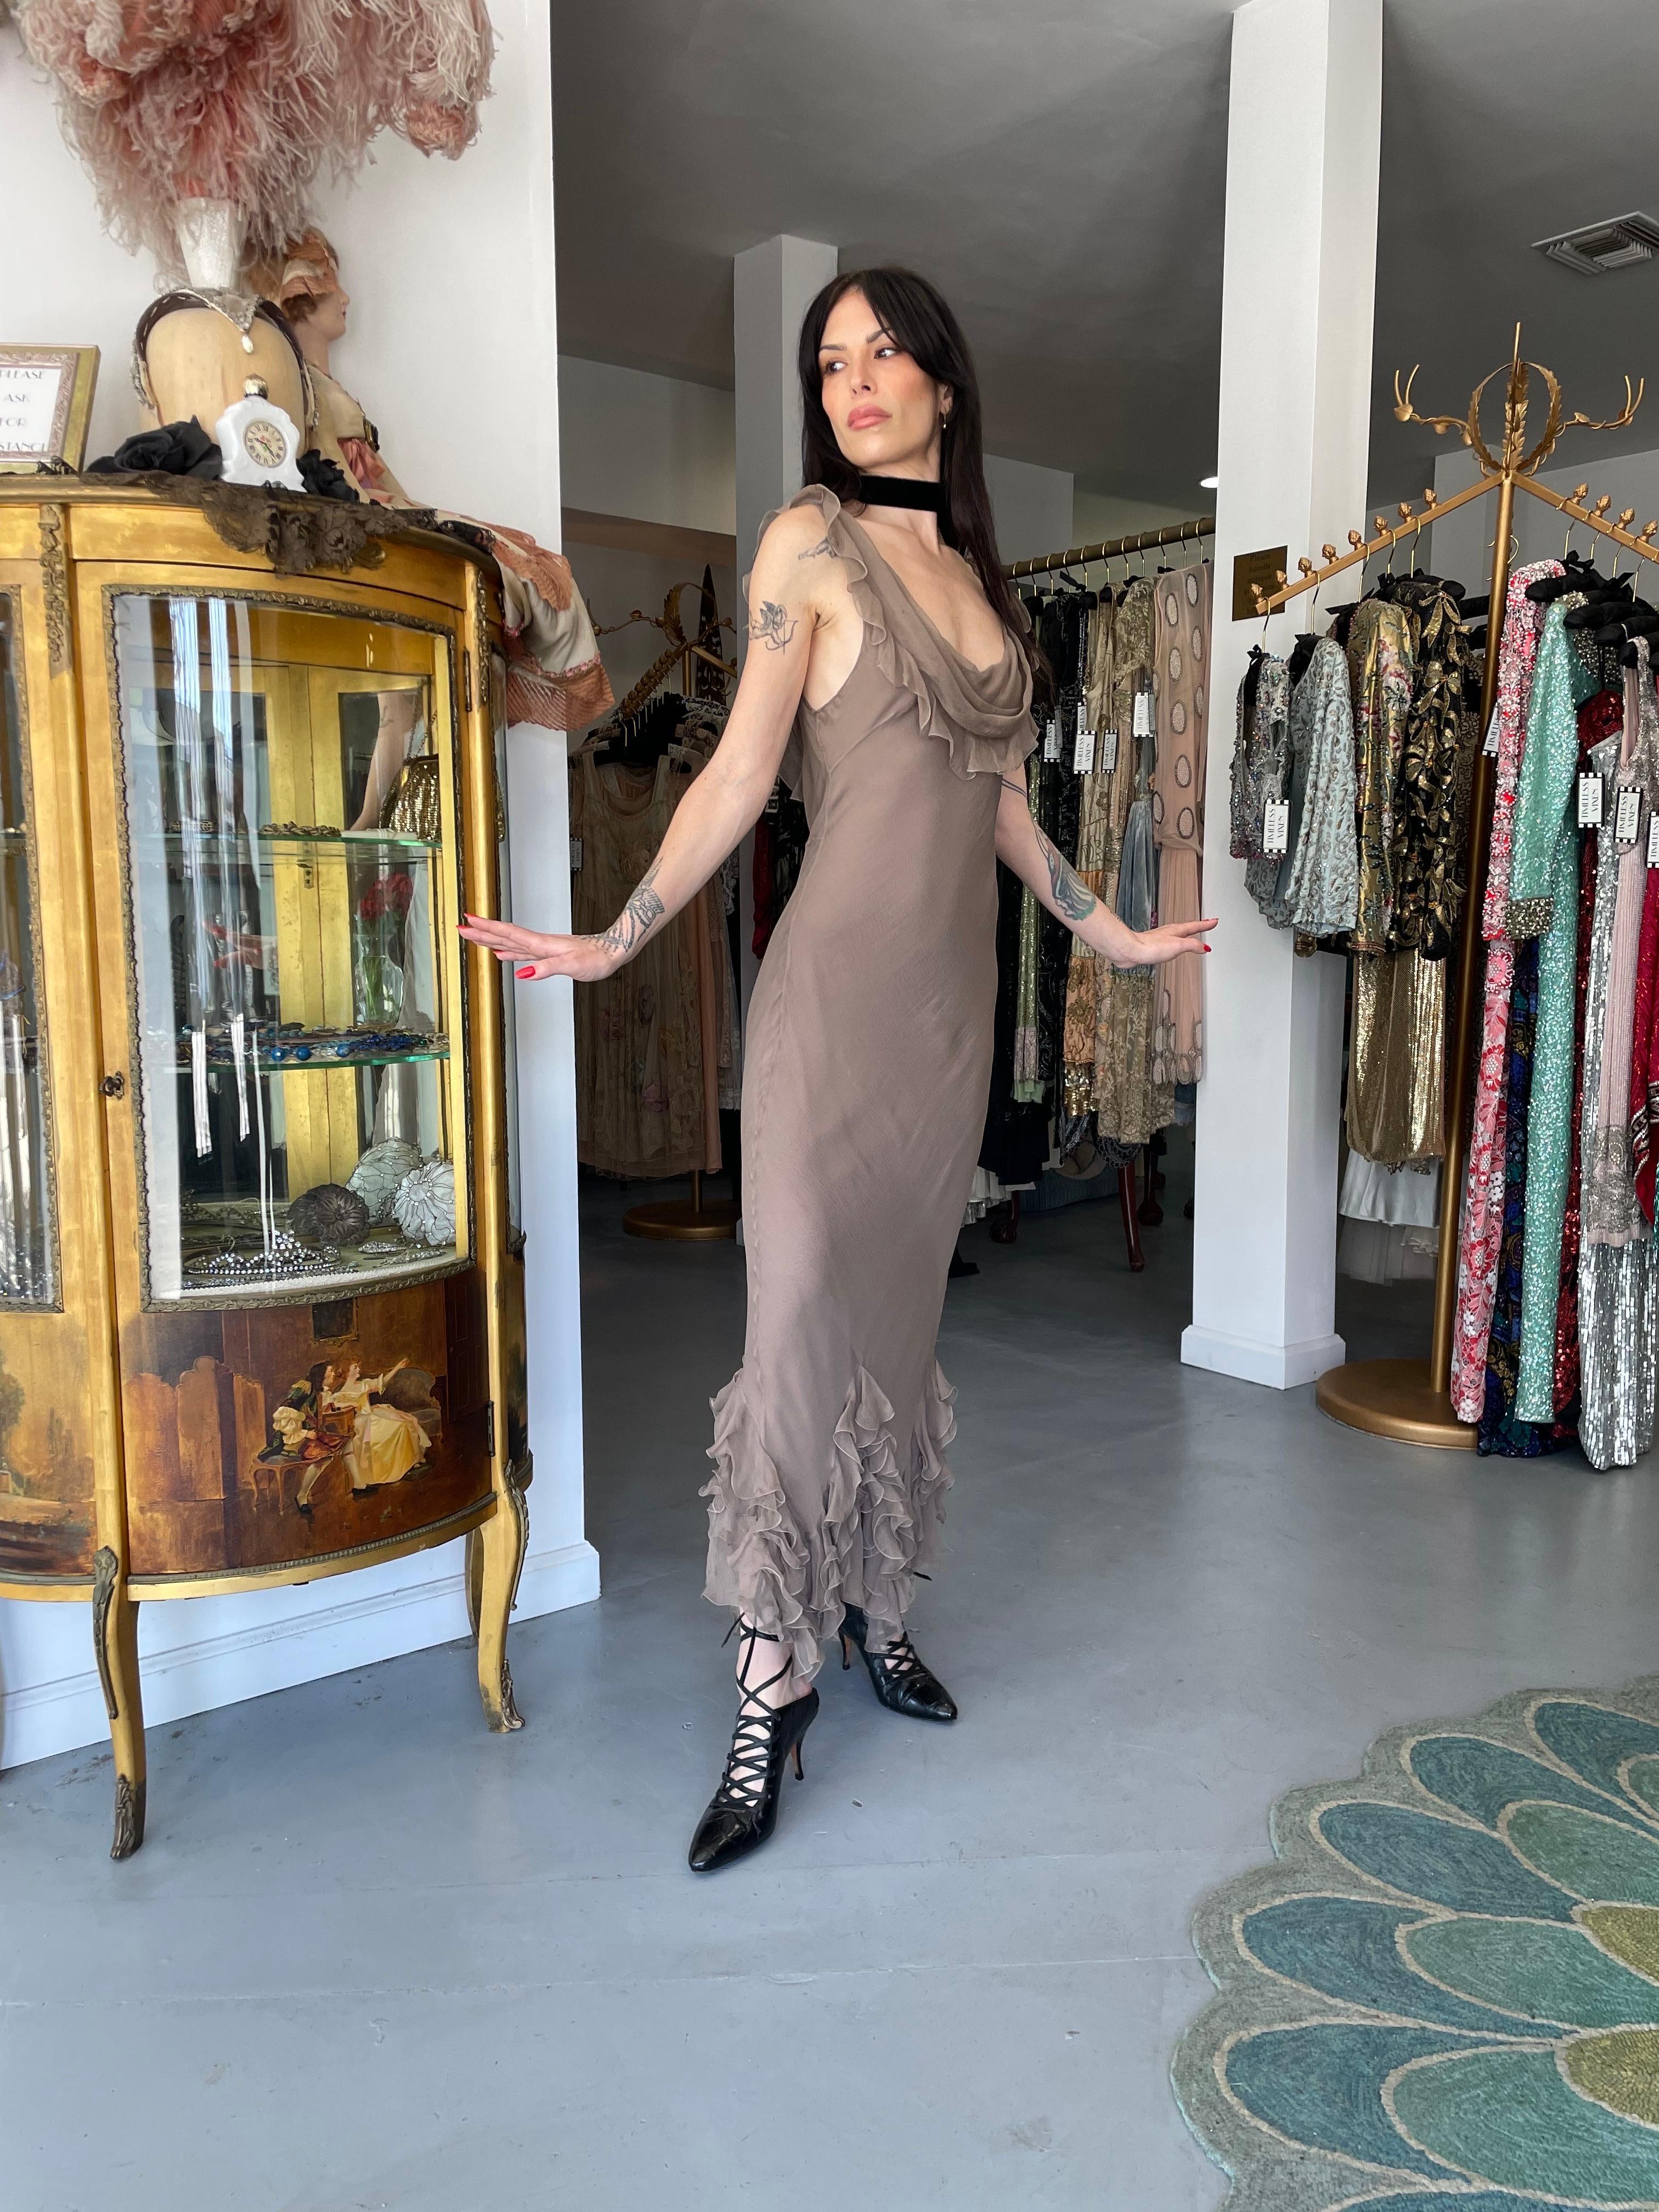 An absolutely breathtaking and highly coveted Christian Dior smoky taupe silk chiffon bias-cut gown dating back to John Galliano's epic 2006 spring/summer collection. John Galliano is widely considered one of the most innovative and influential